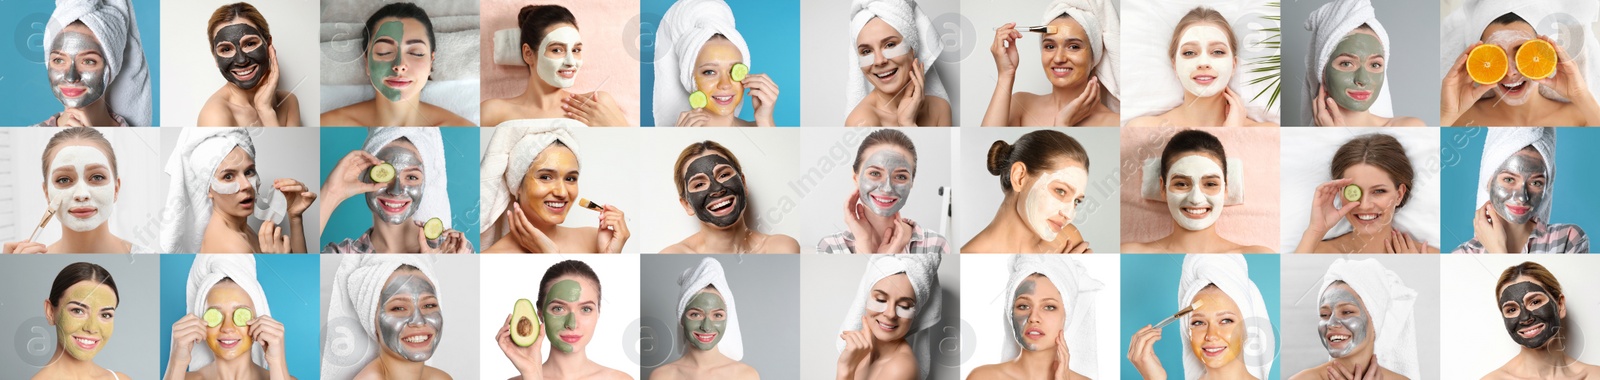 Image of Collage with photos of women with cleansing and moisturizing masks on faces. Banner design